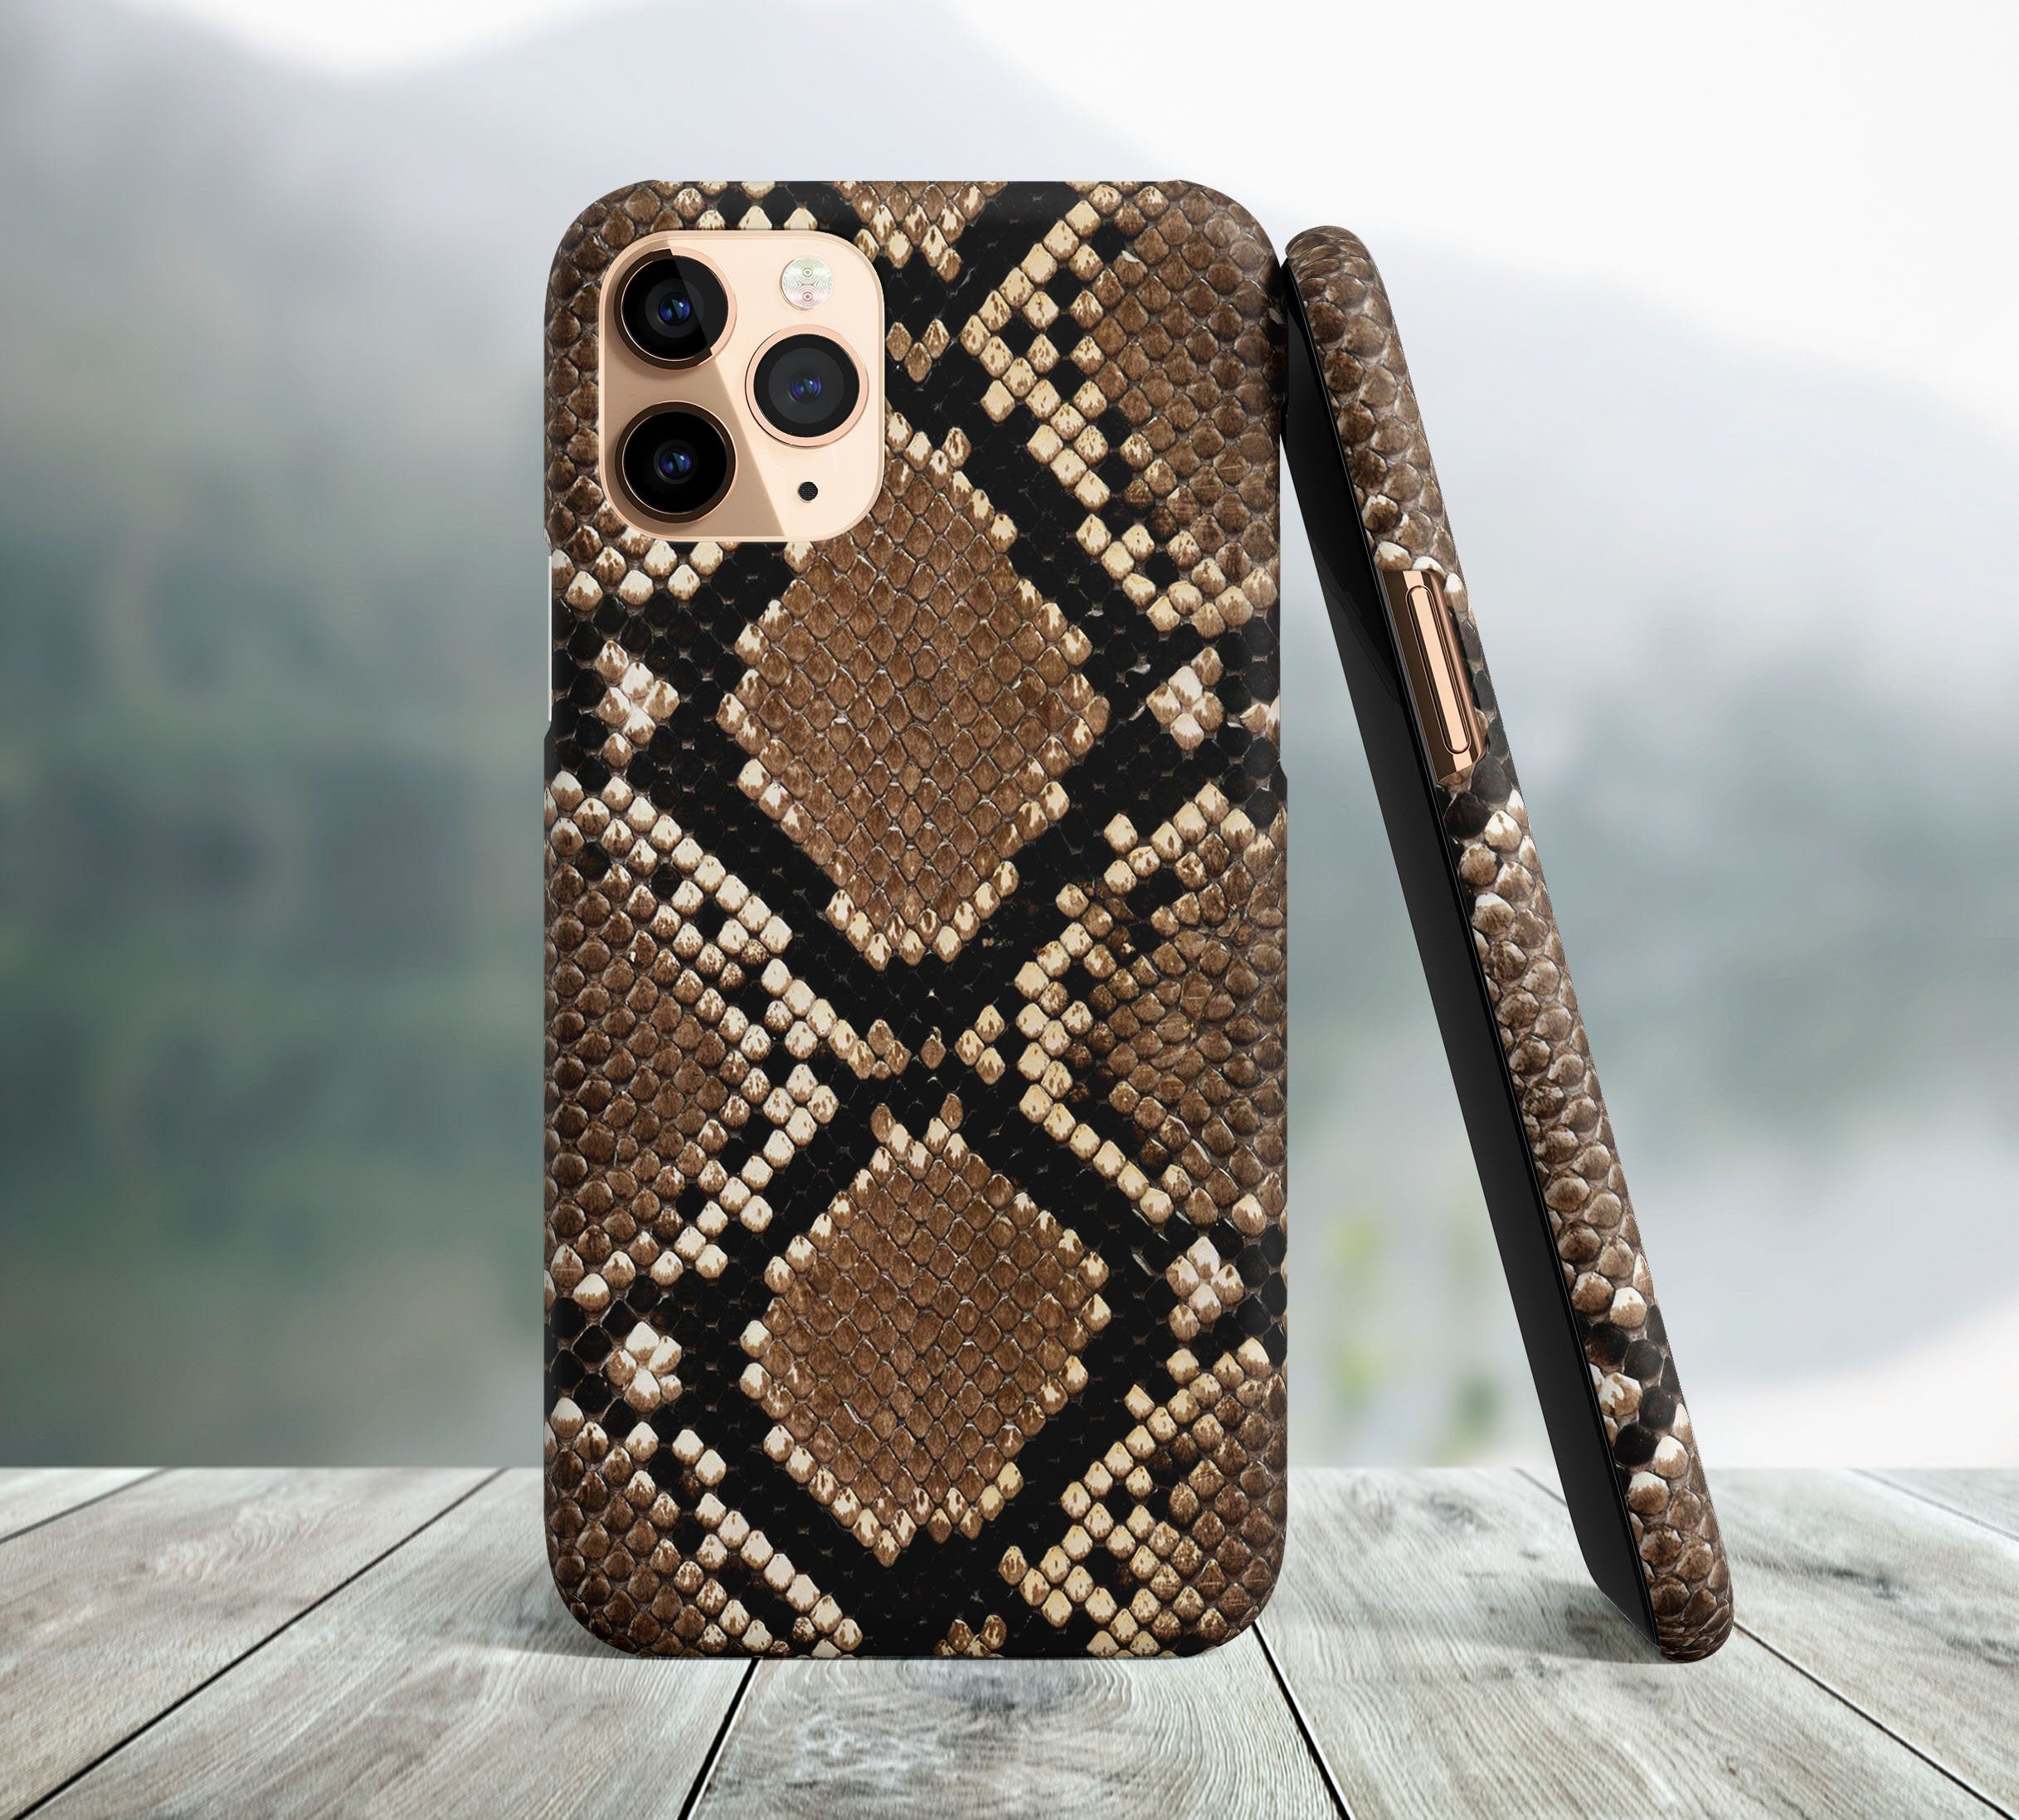 Square metal stand luxury snake pattern faux leather phone case for iphone  13 Pro Max 11 12 Pro MAX Xs Xr X 7 8 plus Se 2 cover